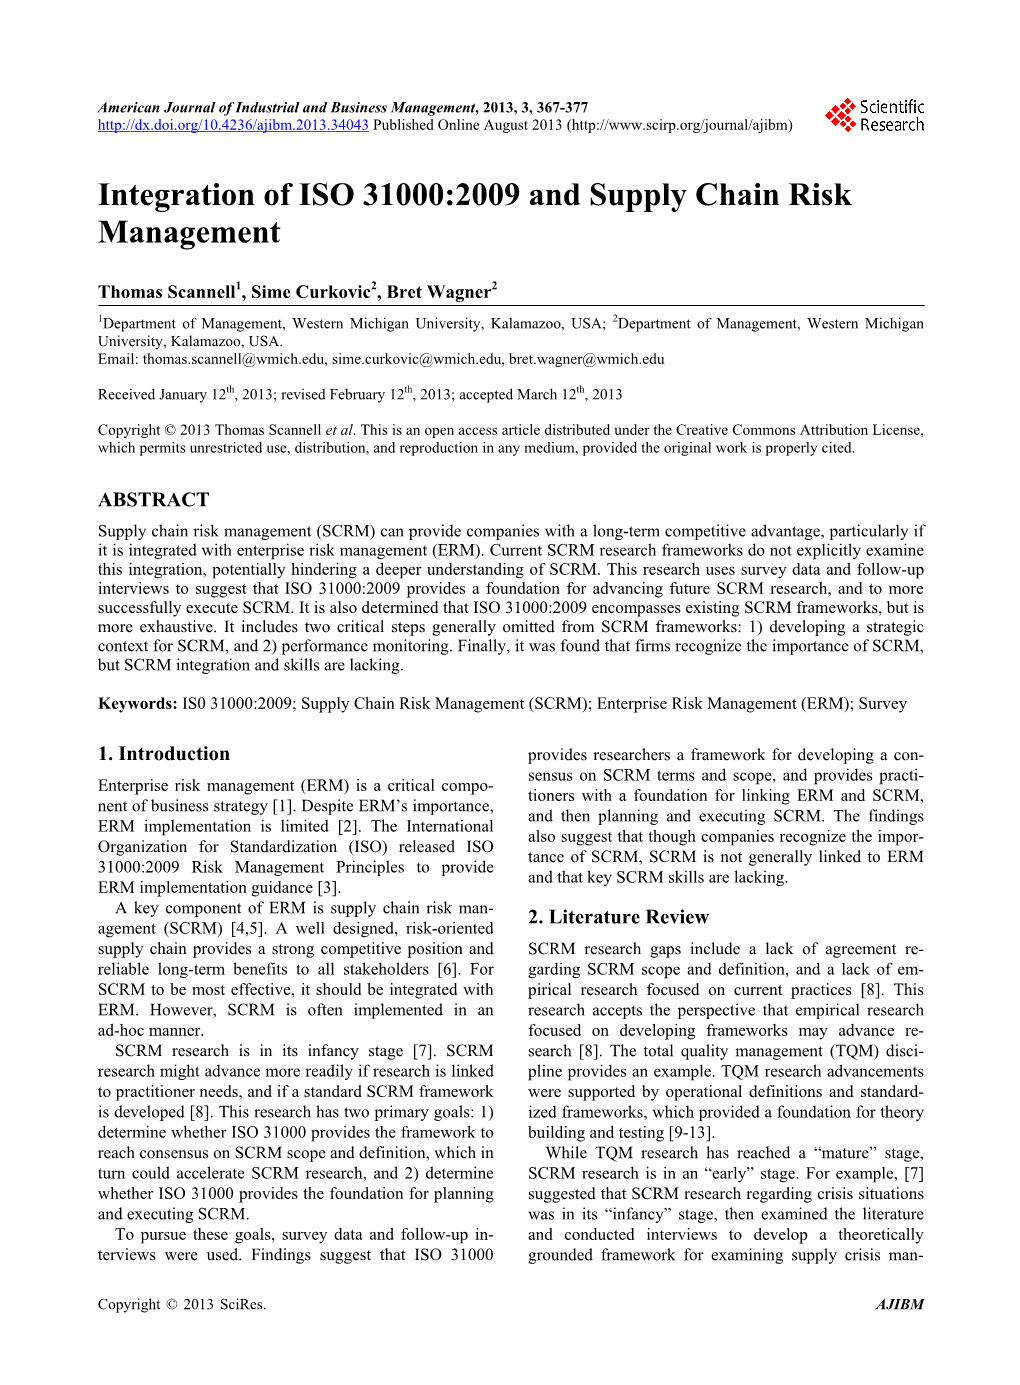 Integration of ISO 31000:2009 and Supply Chain Risk Management